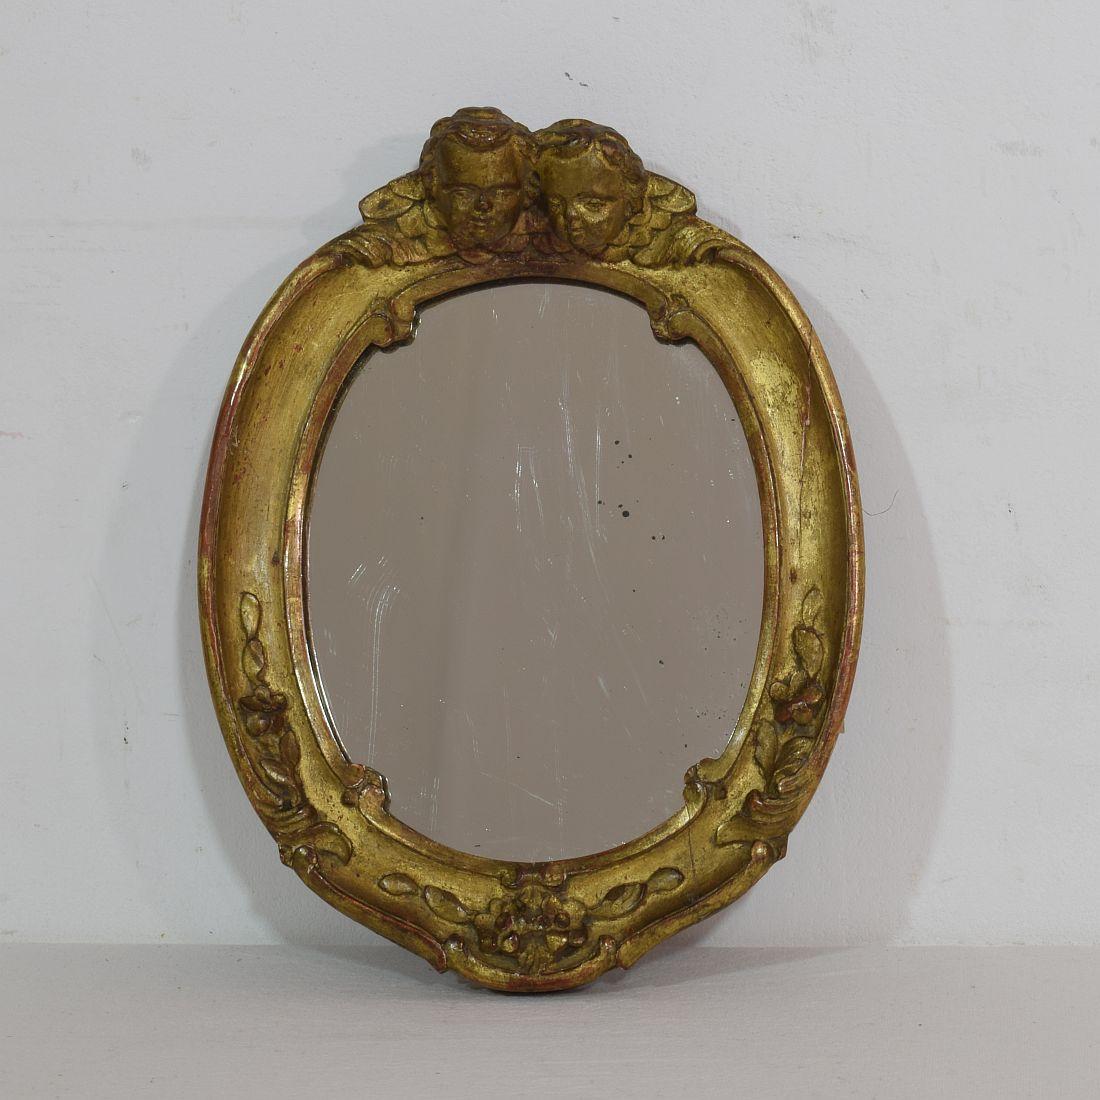 Very nice small Baroque mirror,
France, circa 1750.
Weathered, small losses and old repairs.